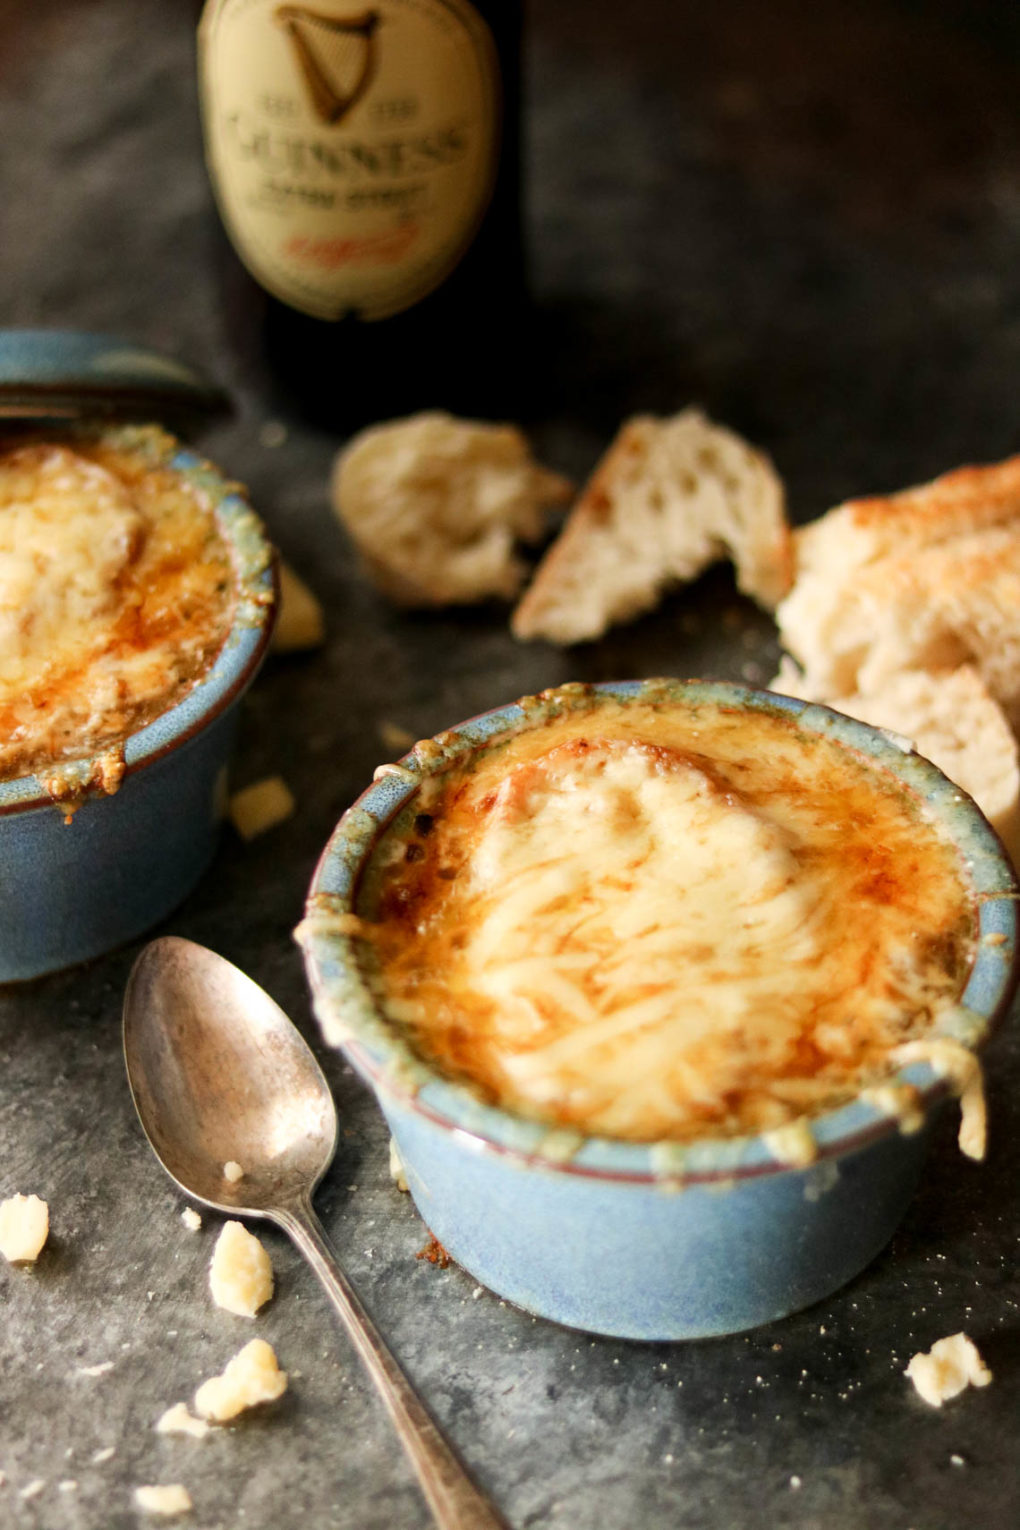 two bowls of Guinness french onion soup. there's a spoon laying nearby and a bottle of Guinness and a baguette in the background